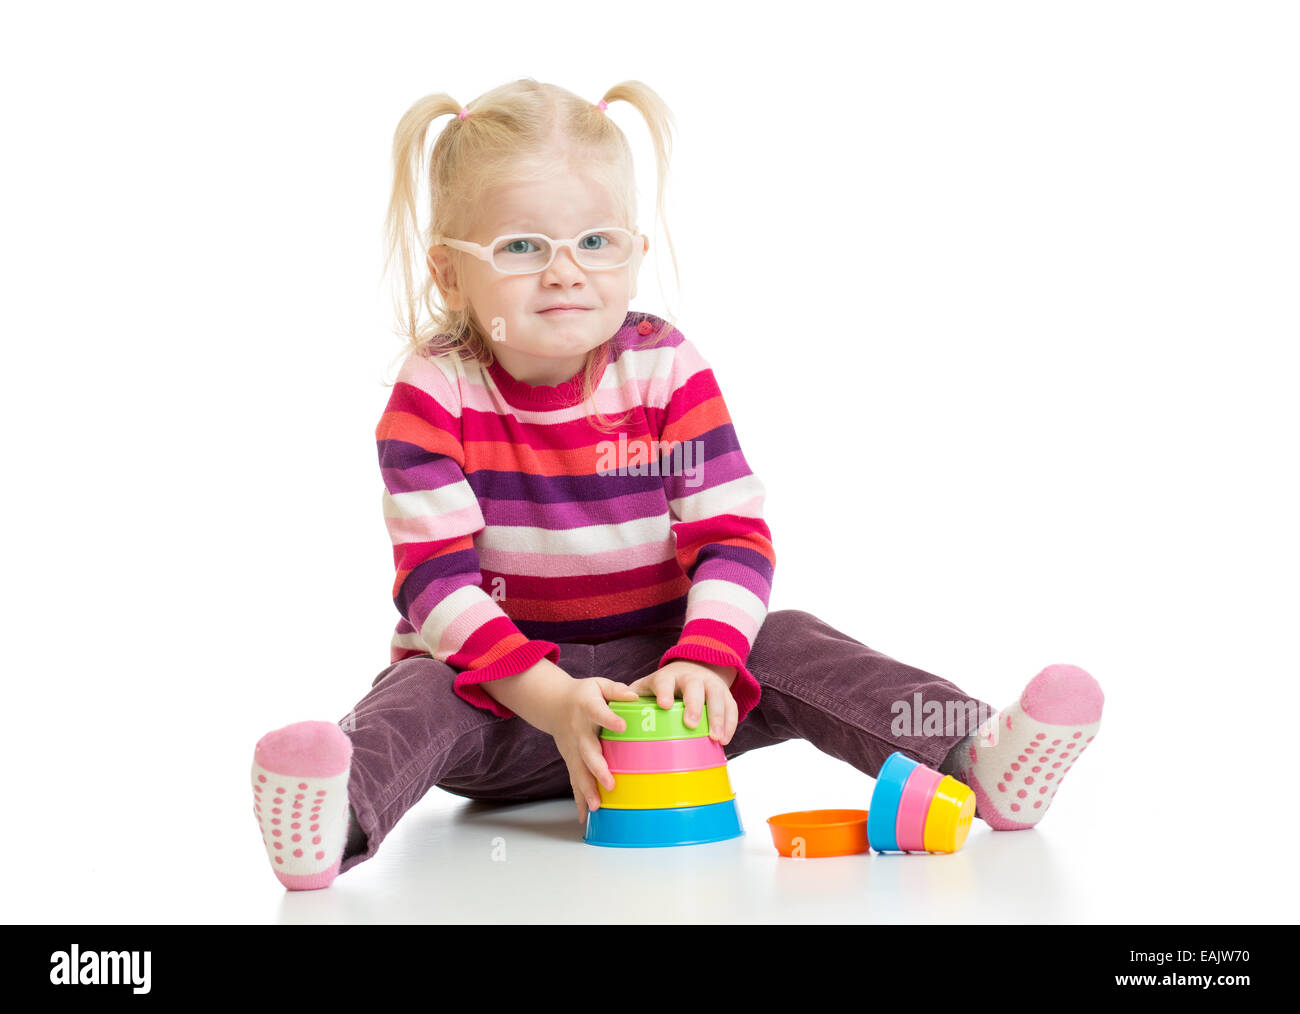 Funny child in eyeglases playing colorful pyramid toy isolated Stock Photo